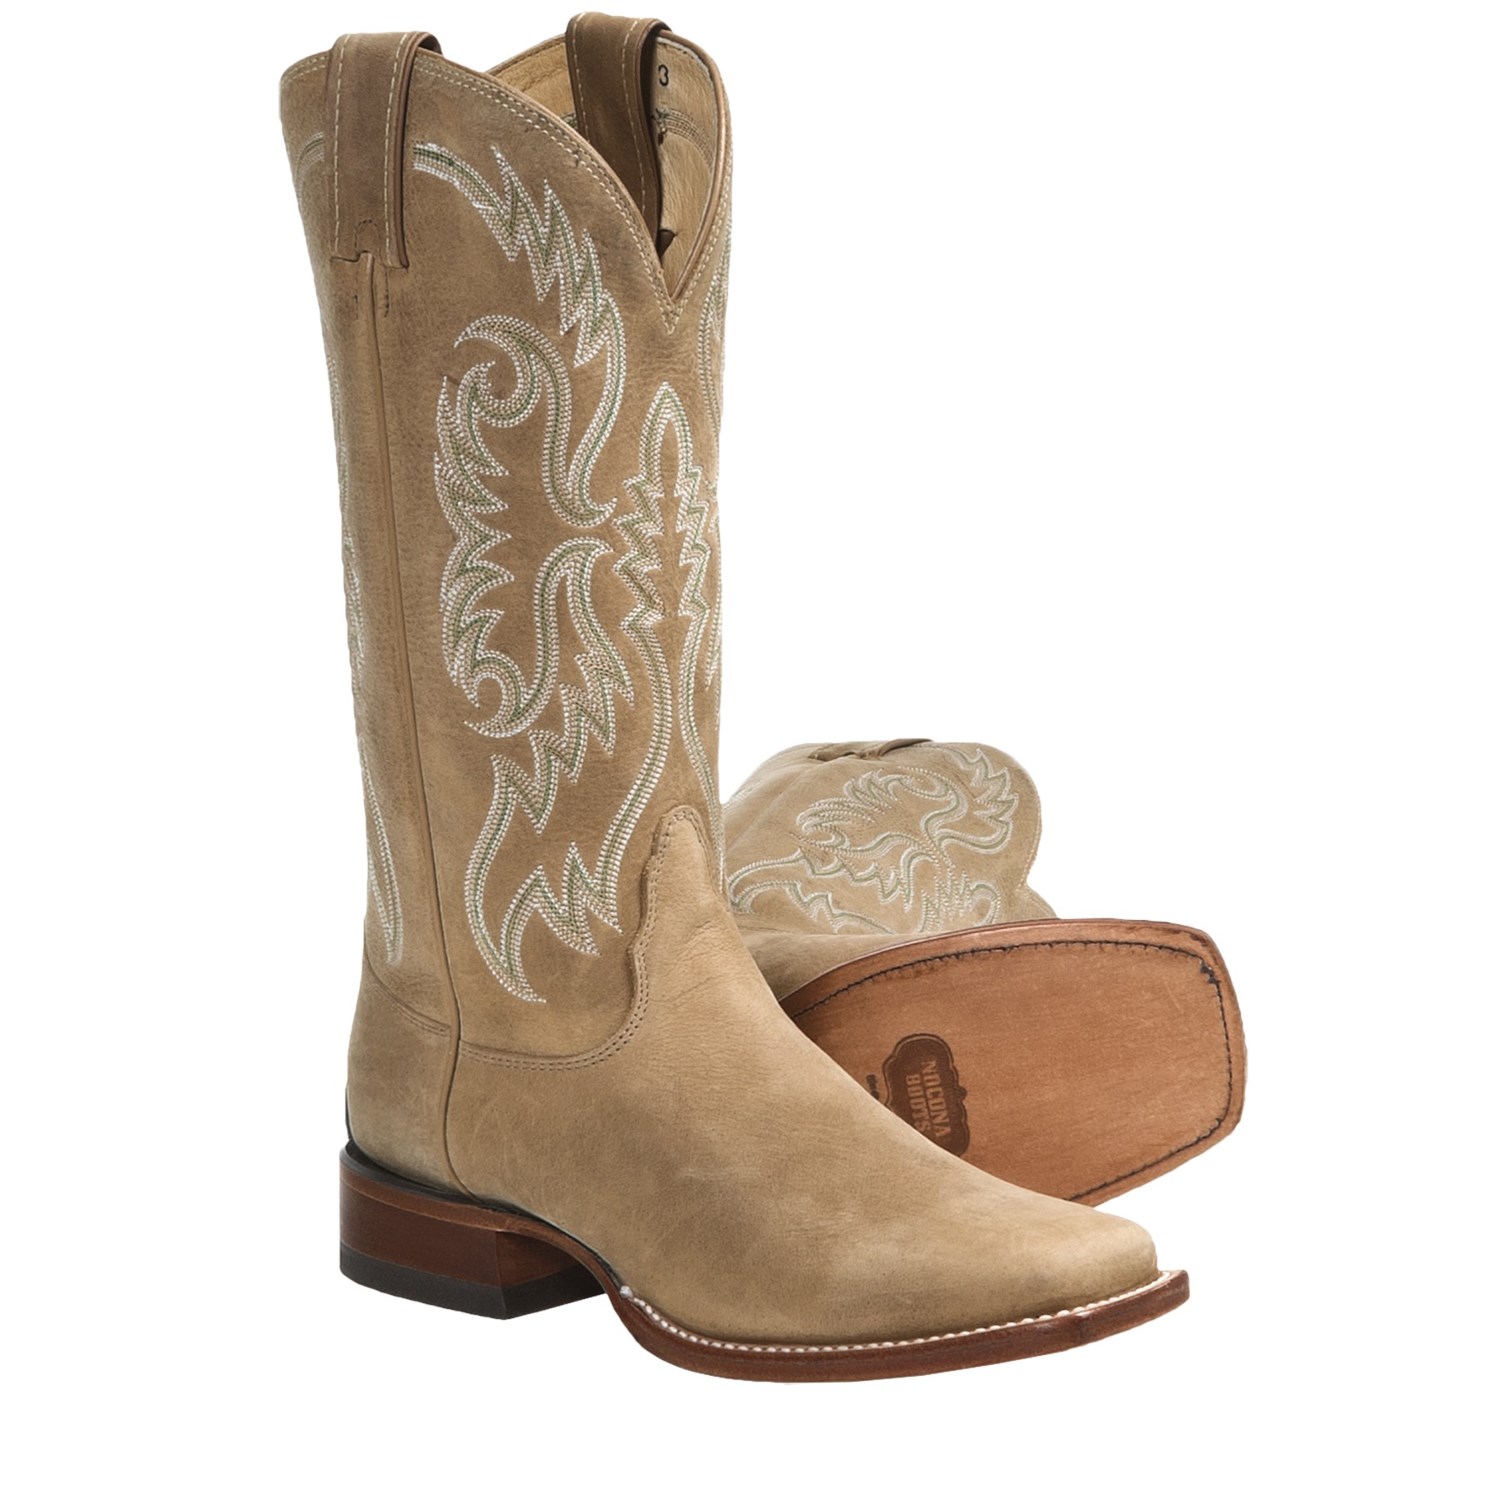 Nocona Boots Square Toe Cowboy Boots - Leather, Square Toe (For Women